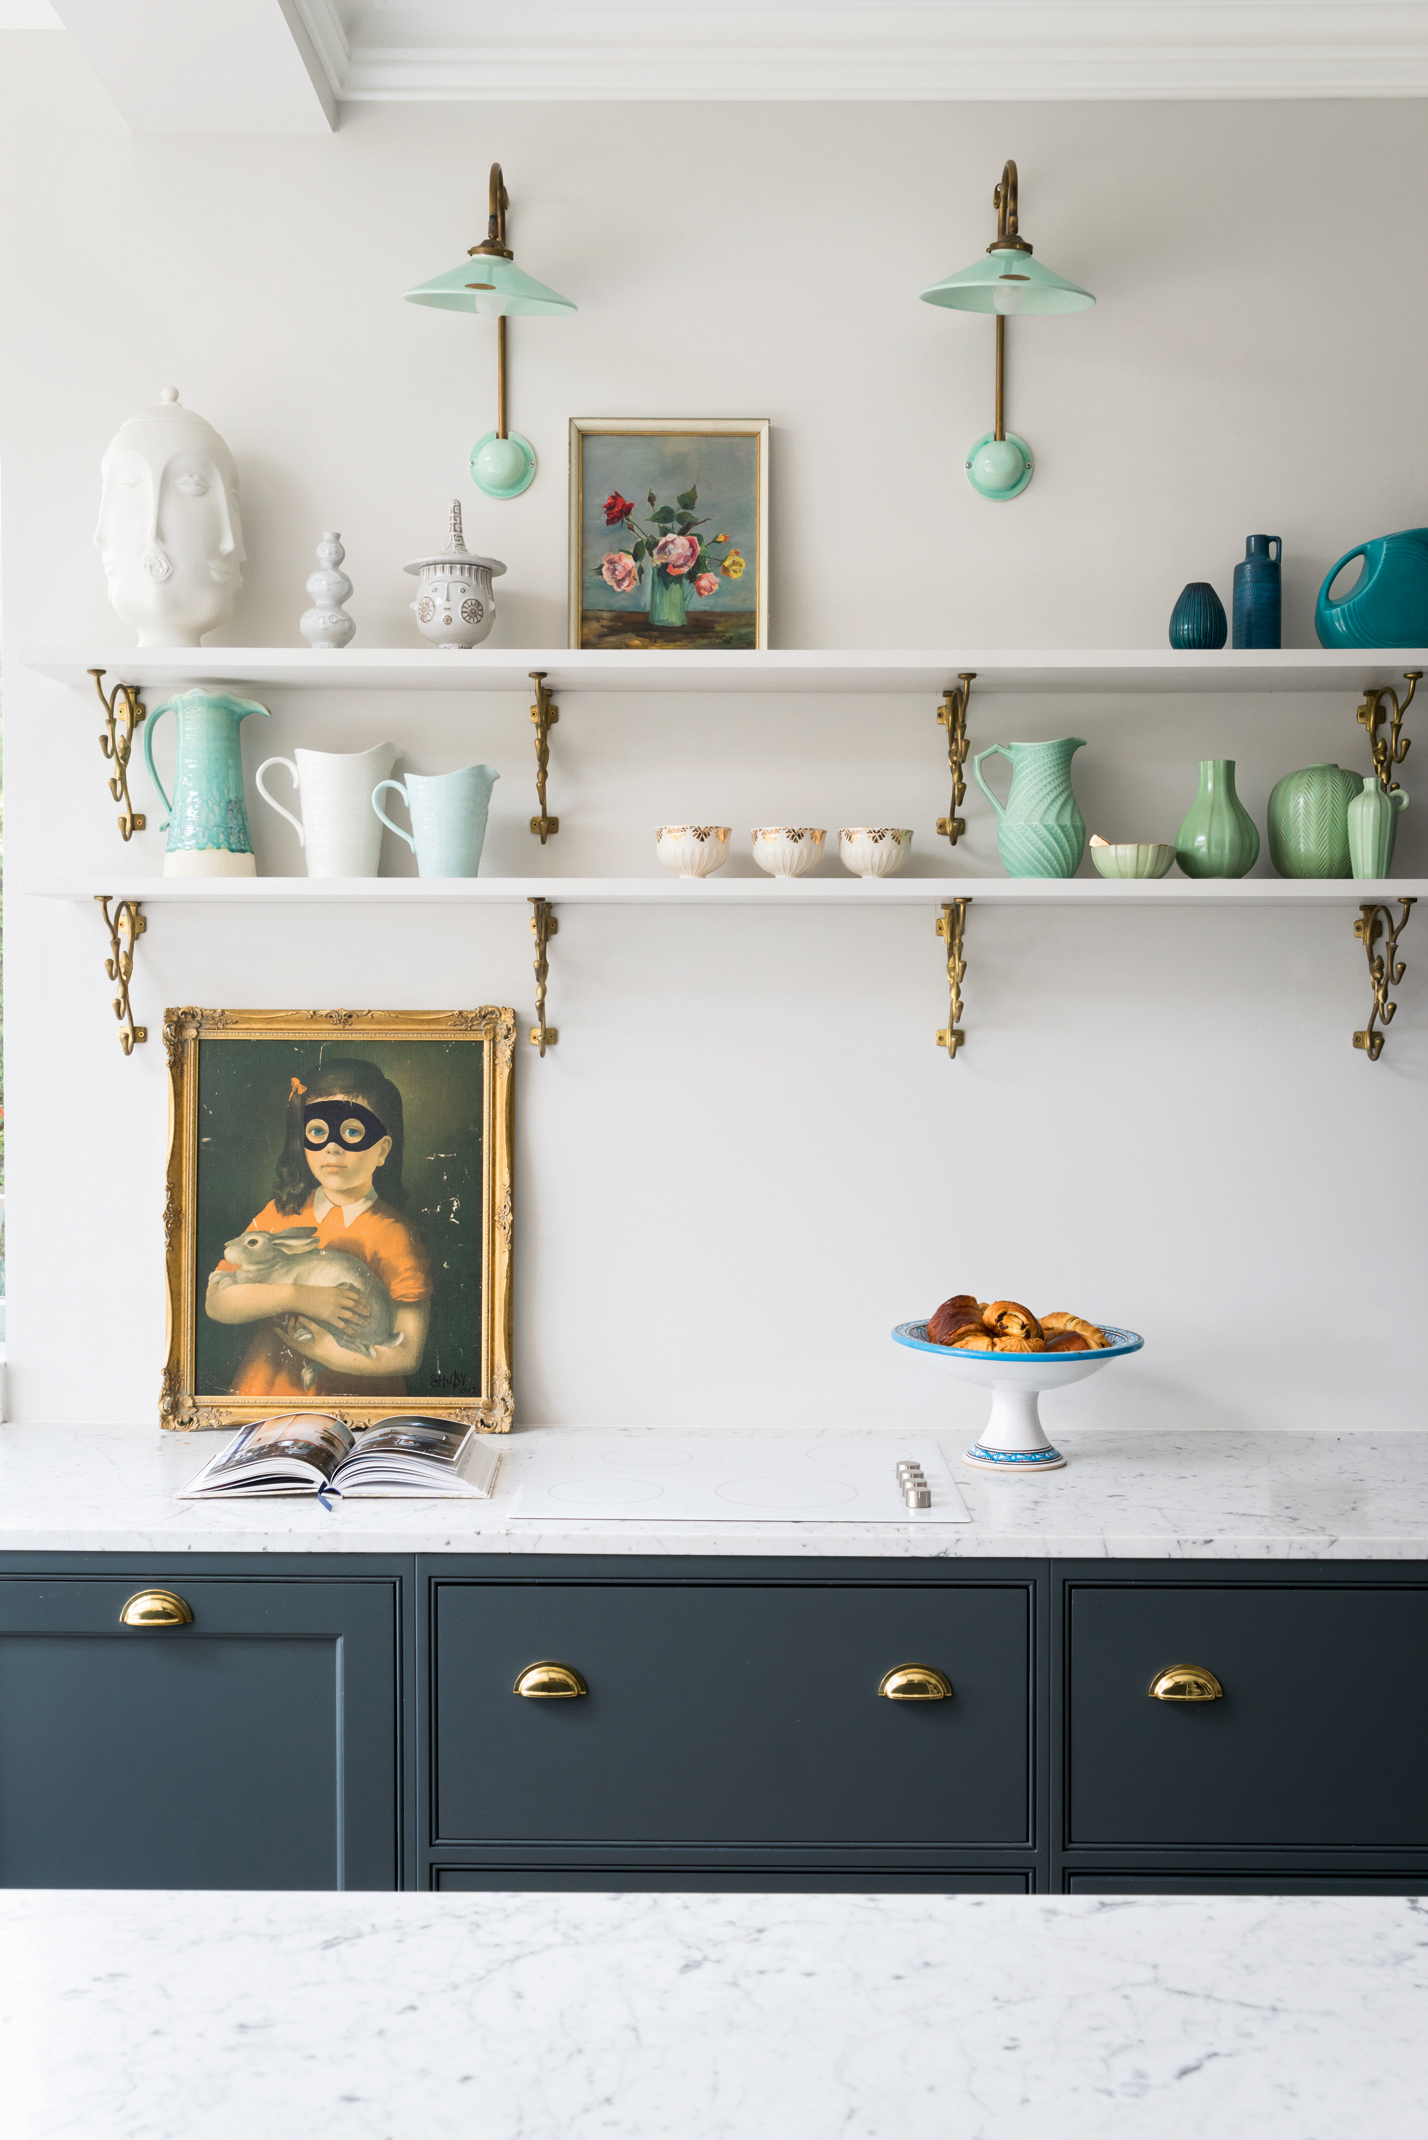 Kitchen color rules – Busola Evans on the best color combination to use ...